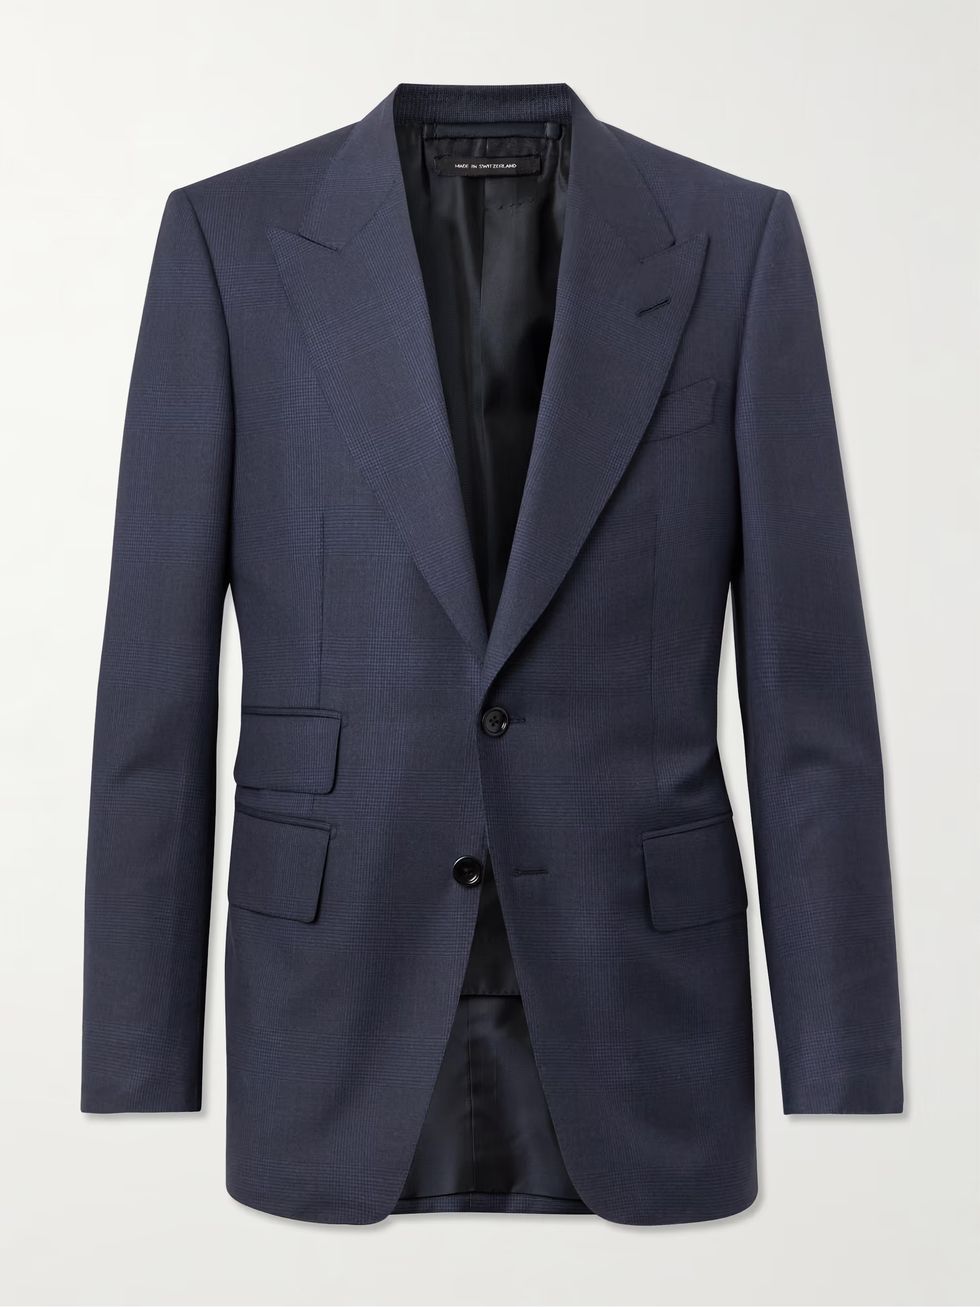 tom ford navy prince of wales check suit